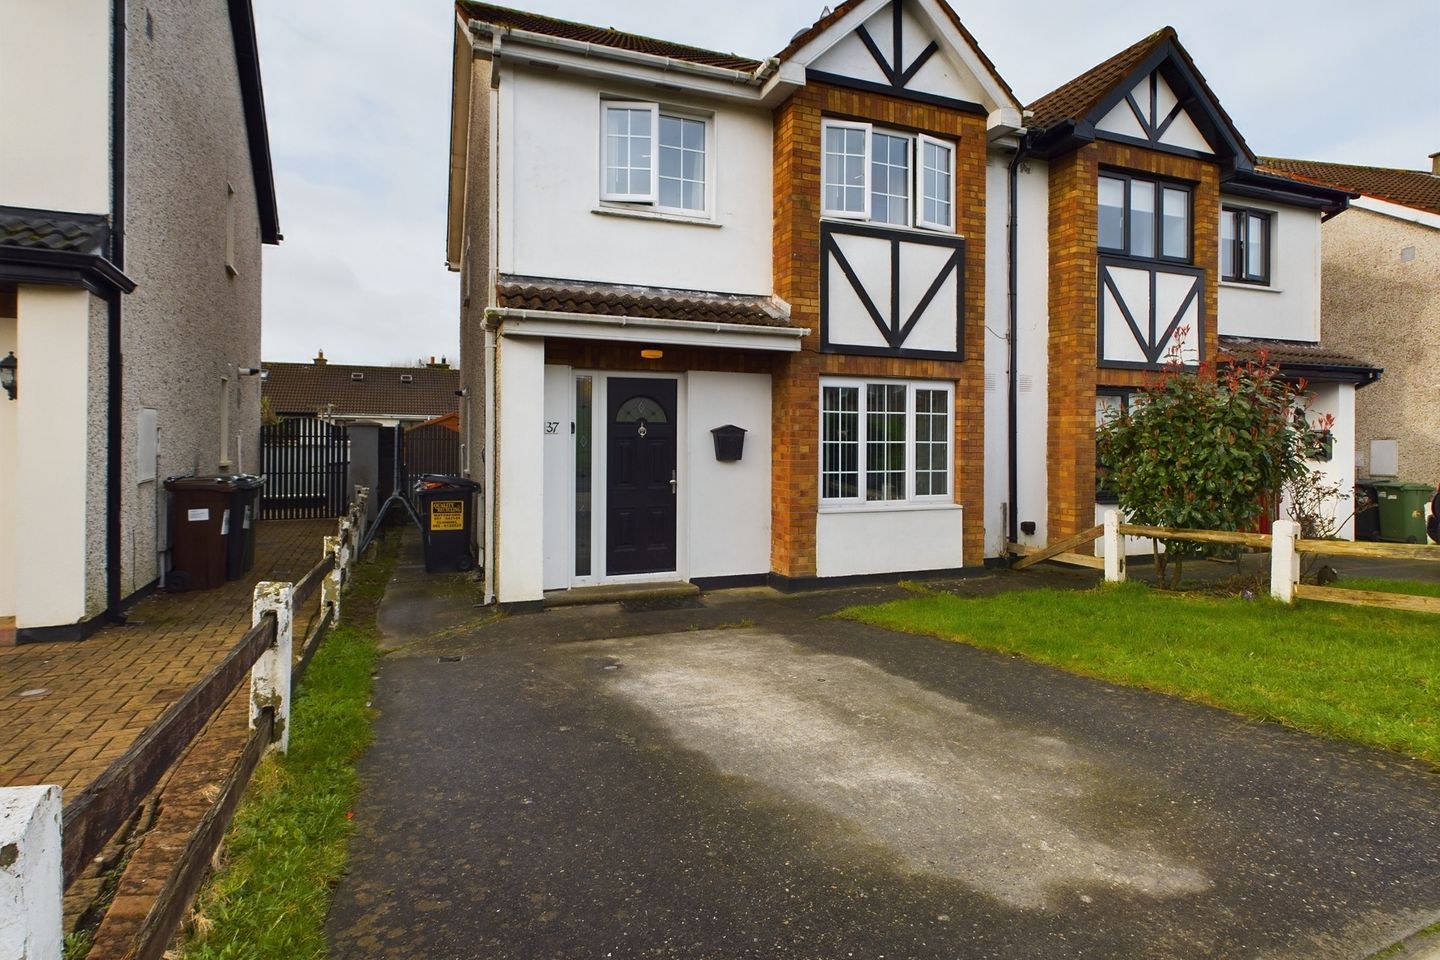 37 Ashley Crescent, Cherrymount, Waterford City, Co. Waterford, X91DP99